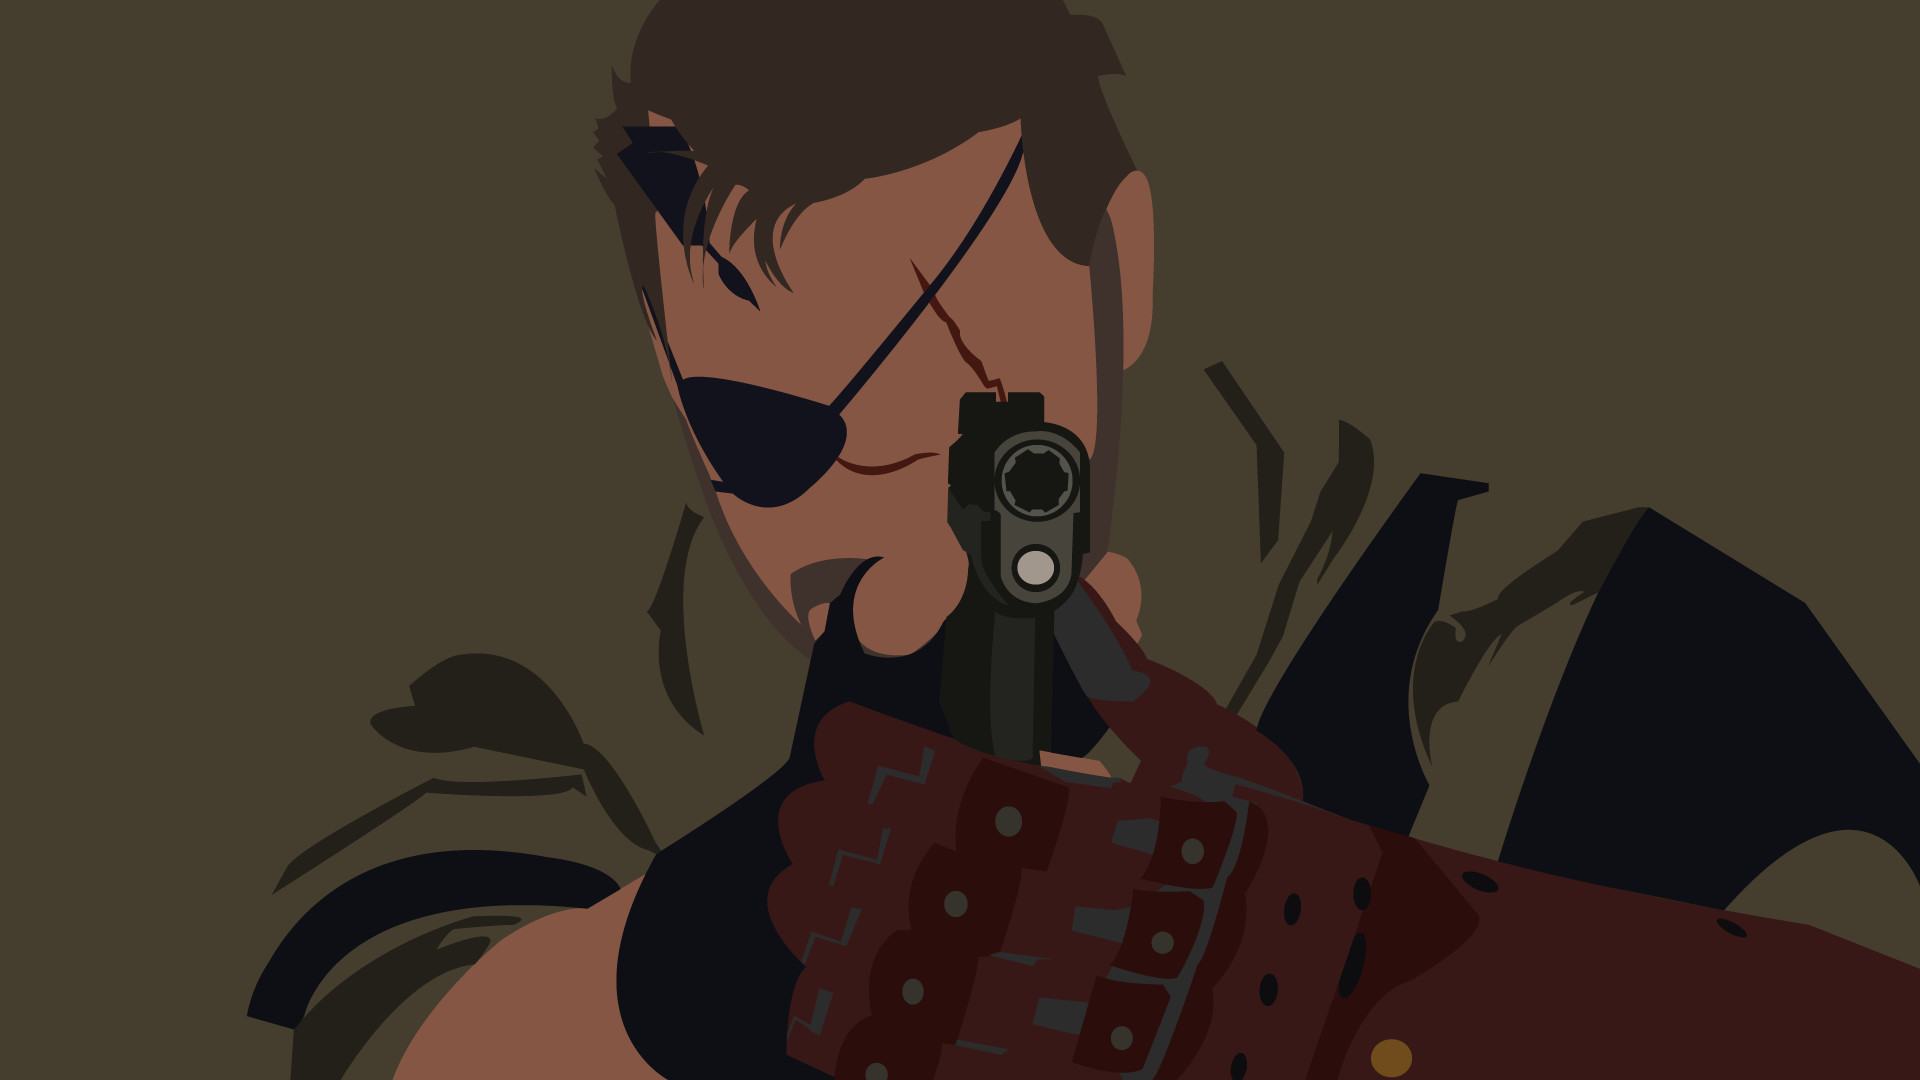 I create vector wallpapers for fun as a hobby. Latest one is Venom Snake